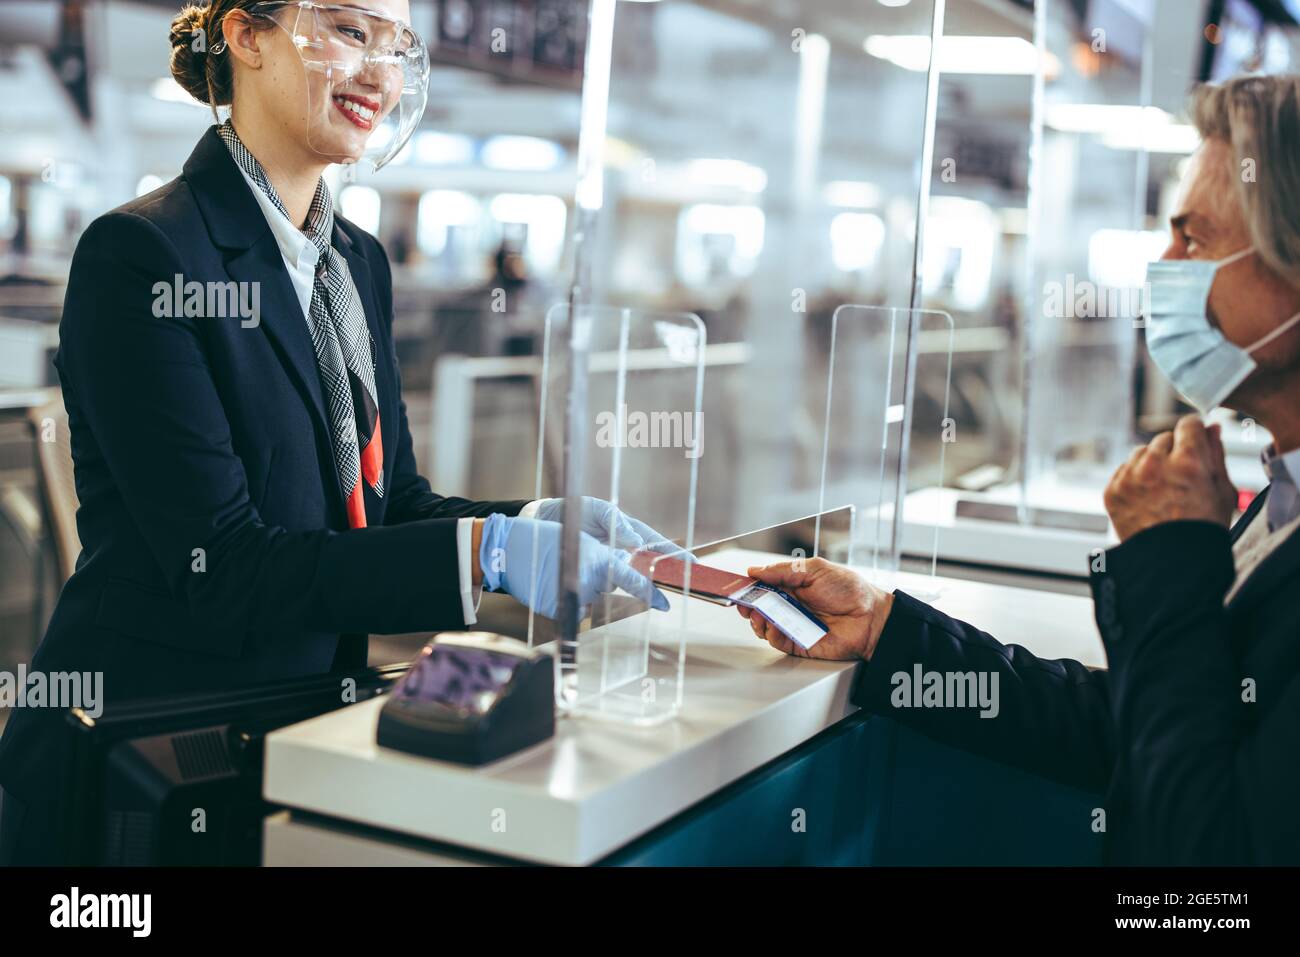 Man holding boarding pass and passport at airline check-in desk at international airport during pandemic. Airport employee in face shield and passenge Stock Photo